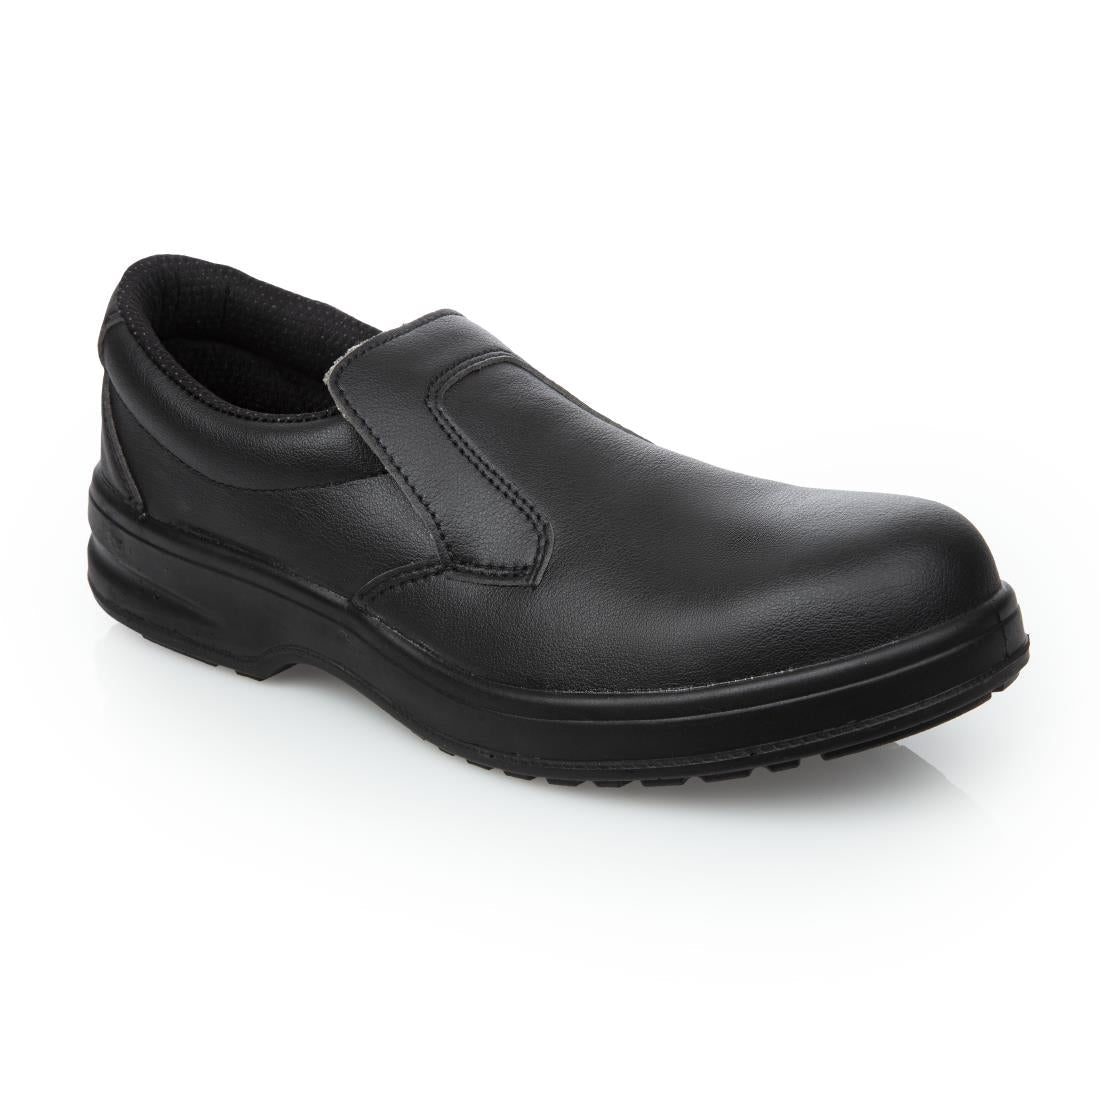 A845-37 Slipbuster Lite Slip On Safety Shoes Black 37 JD Catering Equipment Solutions Ltd